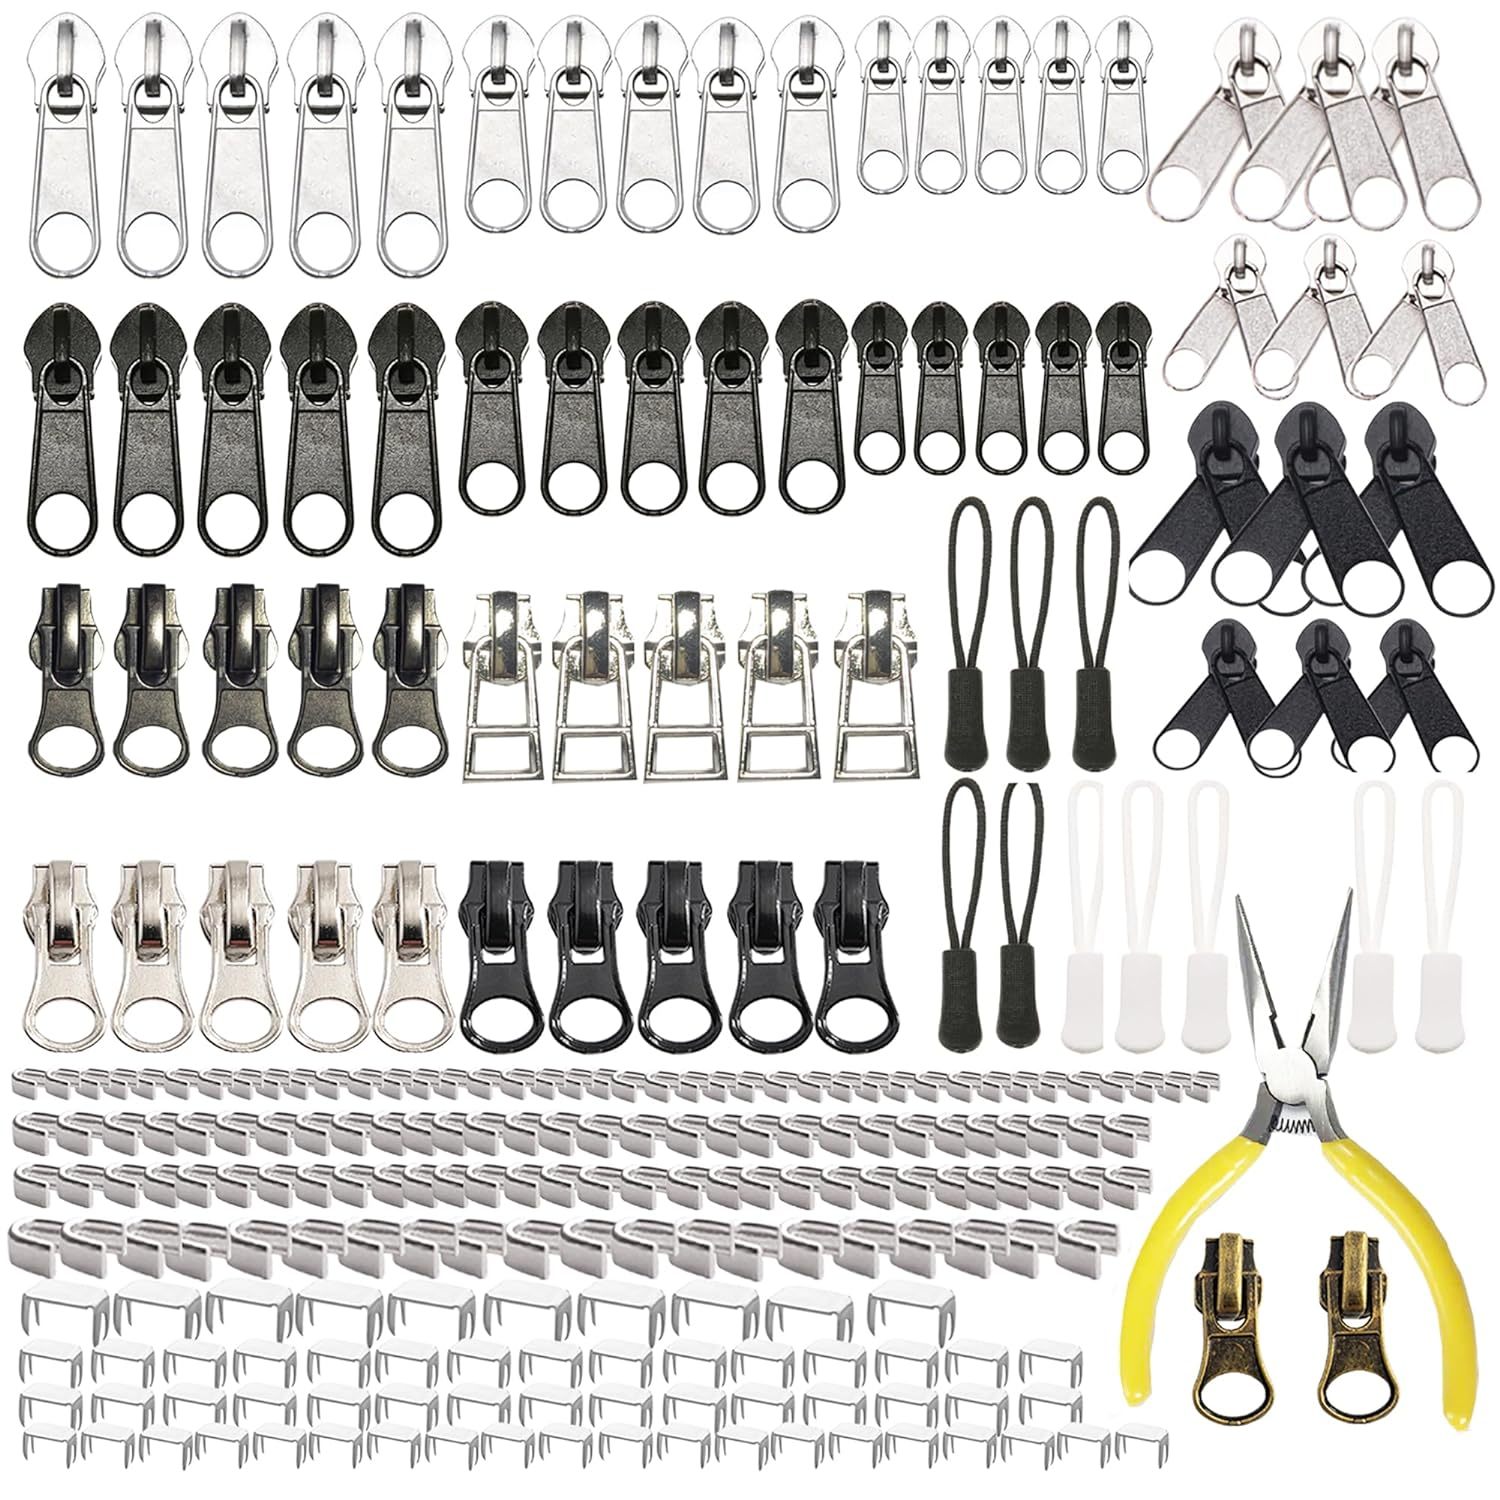  ZipperStop Wholesale - Zipper Repair Kit Solution 9 Sets YKK  Auto Lock Sliders Assorted 3 of #3, 2 of #5, 2 of #7 and 2 of #10 Included  Top & Bottom